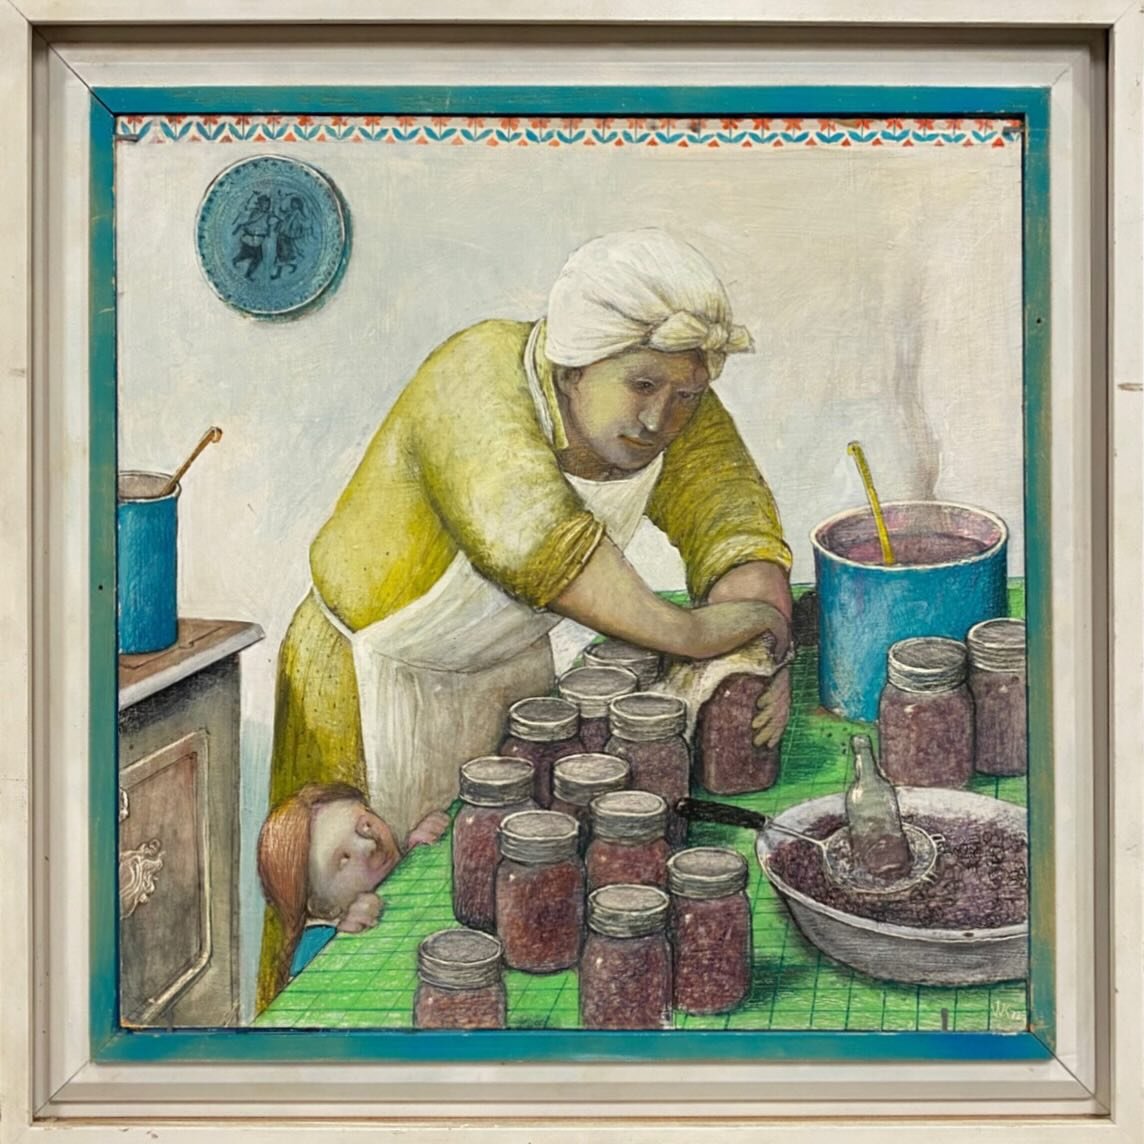 This Mother&rsquo;s Day, we&rsquo;re featuring &ldquo;Saskatoon Jam&rdquo; by William Kurelek from our Art Collection&mdash;a tribute to his mother&rsquo;s tradition of making jam from saskatoons on the prairies.

Alongside the artwork, Kurelek share